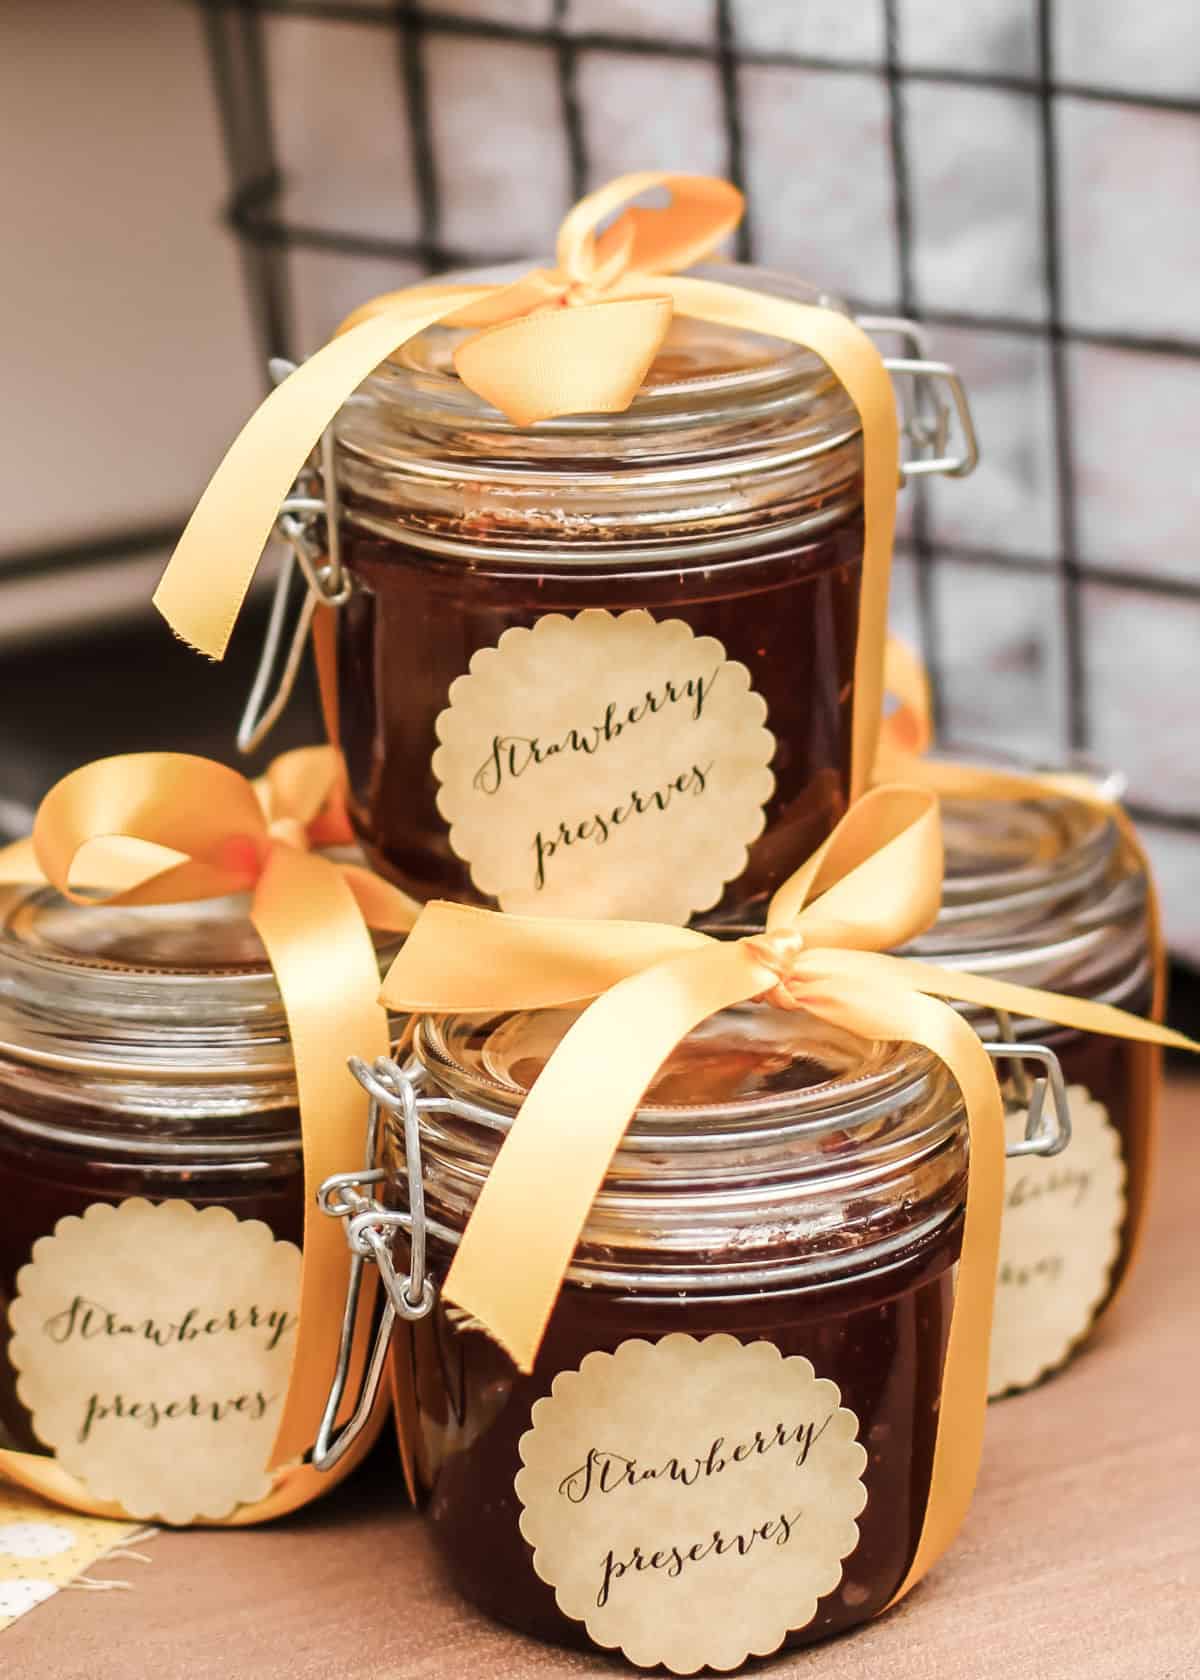 homemade jam in glass jars with ribbon and tag.